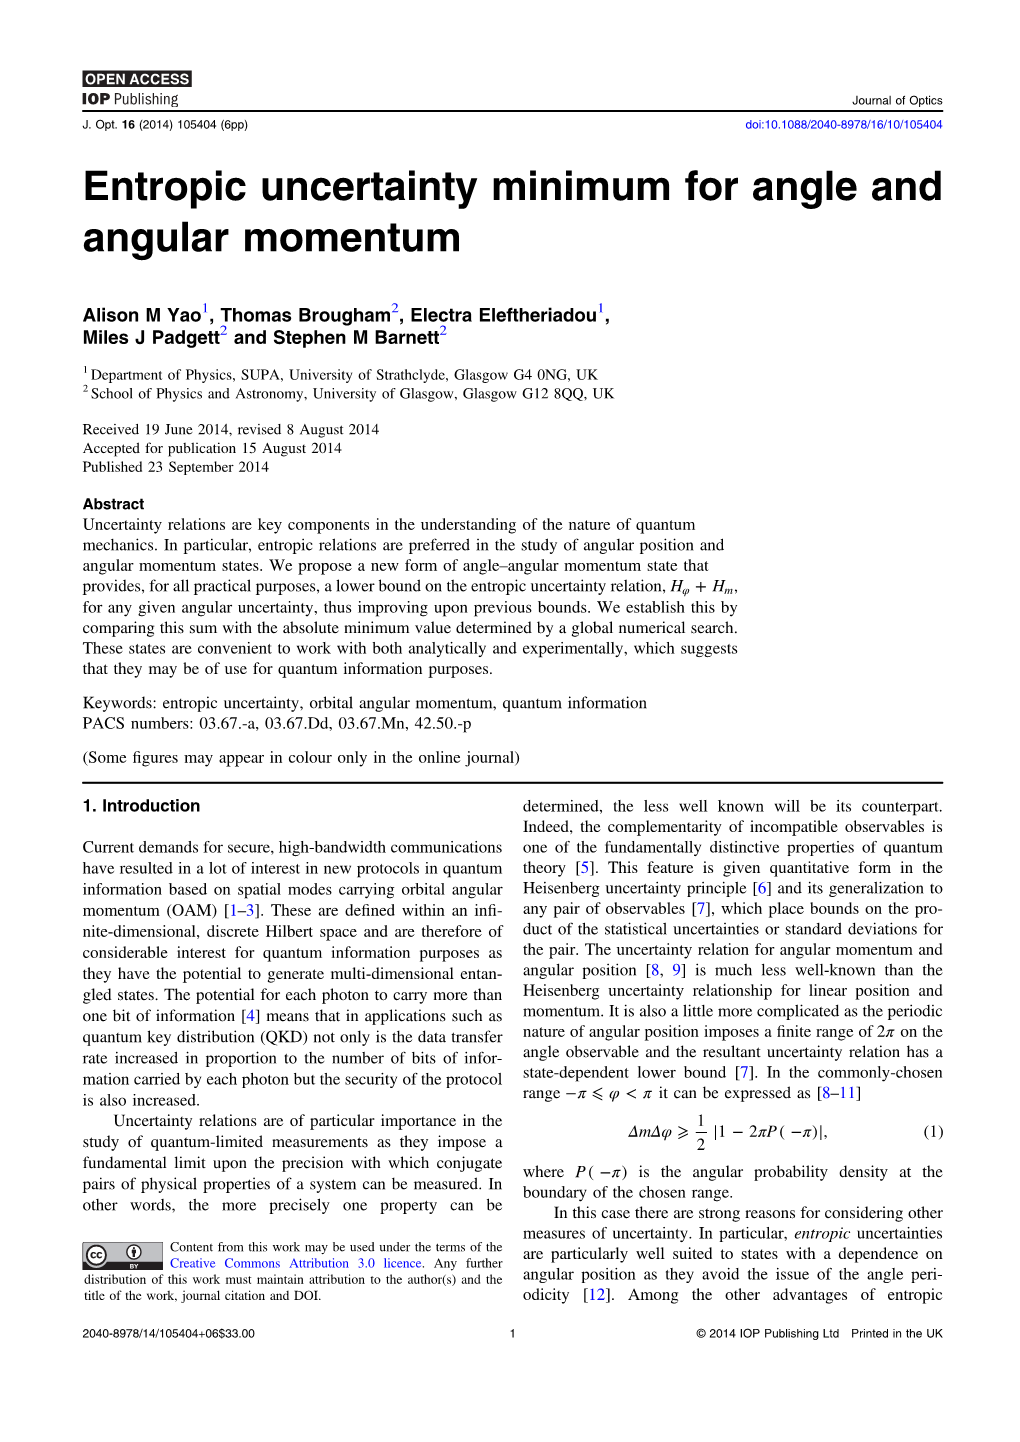 Entropic Uncertainty Minimum for Angle and Angular Momentum